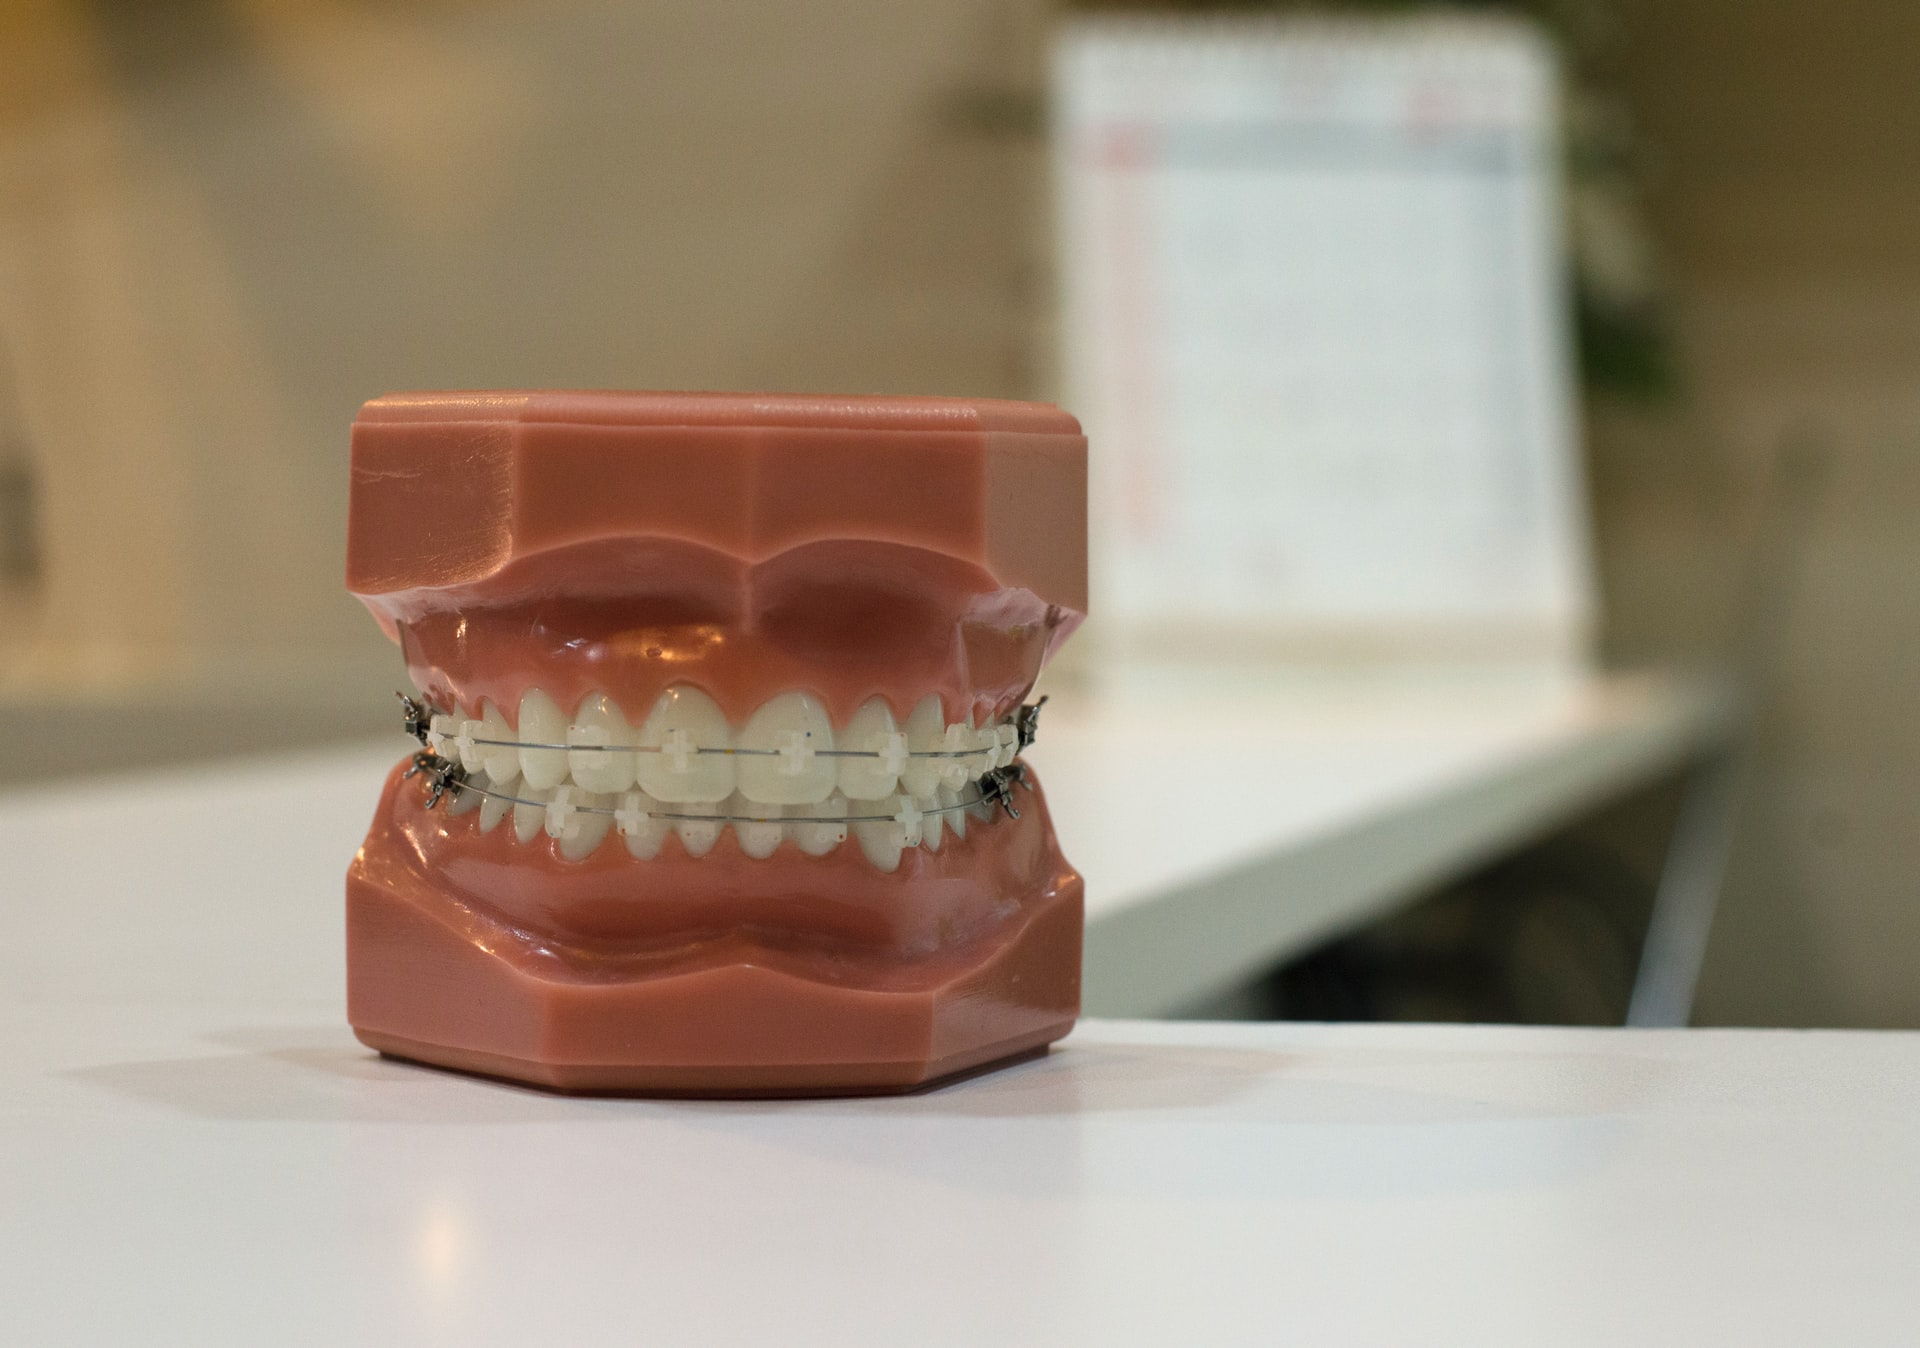 Invisalign vs Traditional Braces: Which is Better?